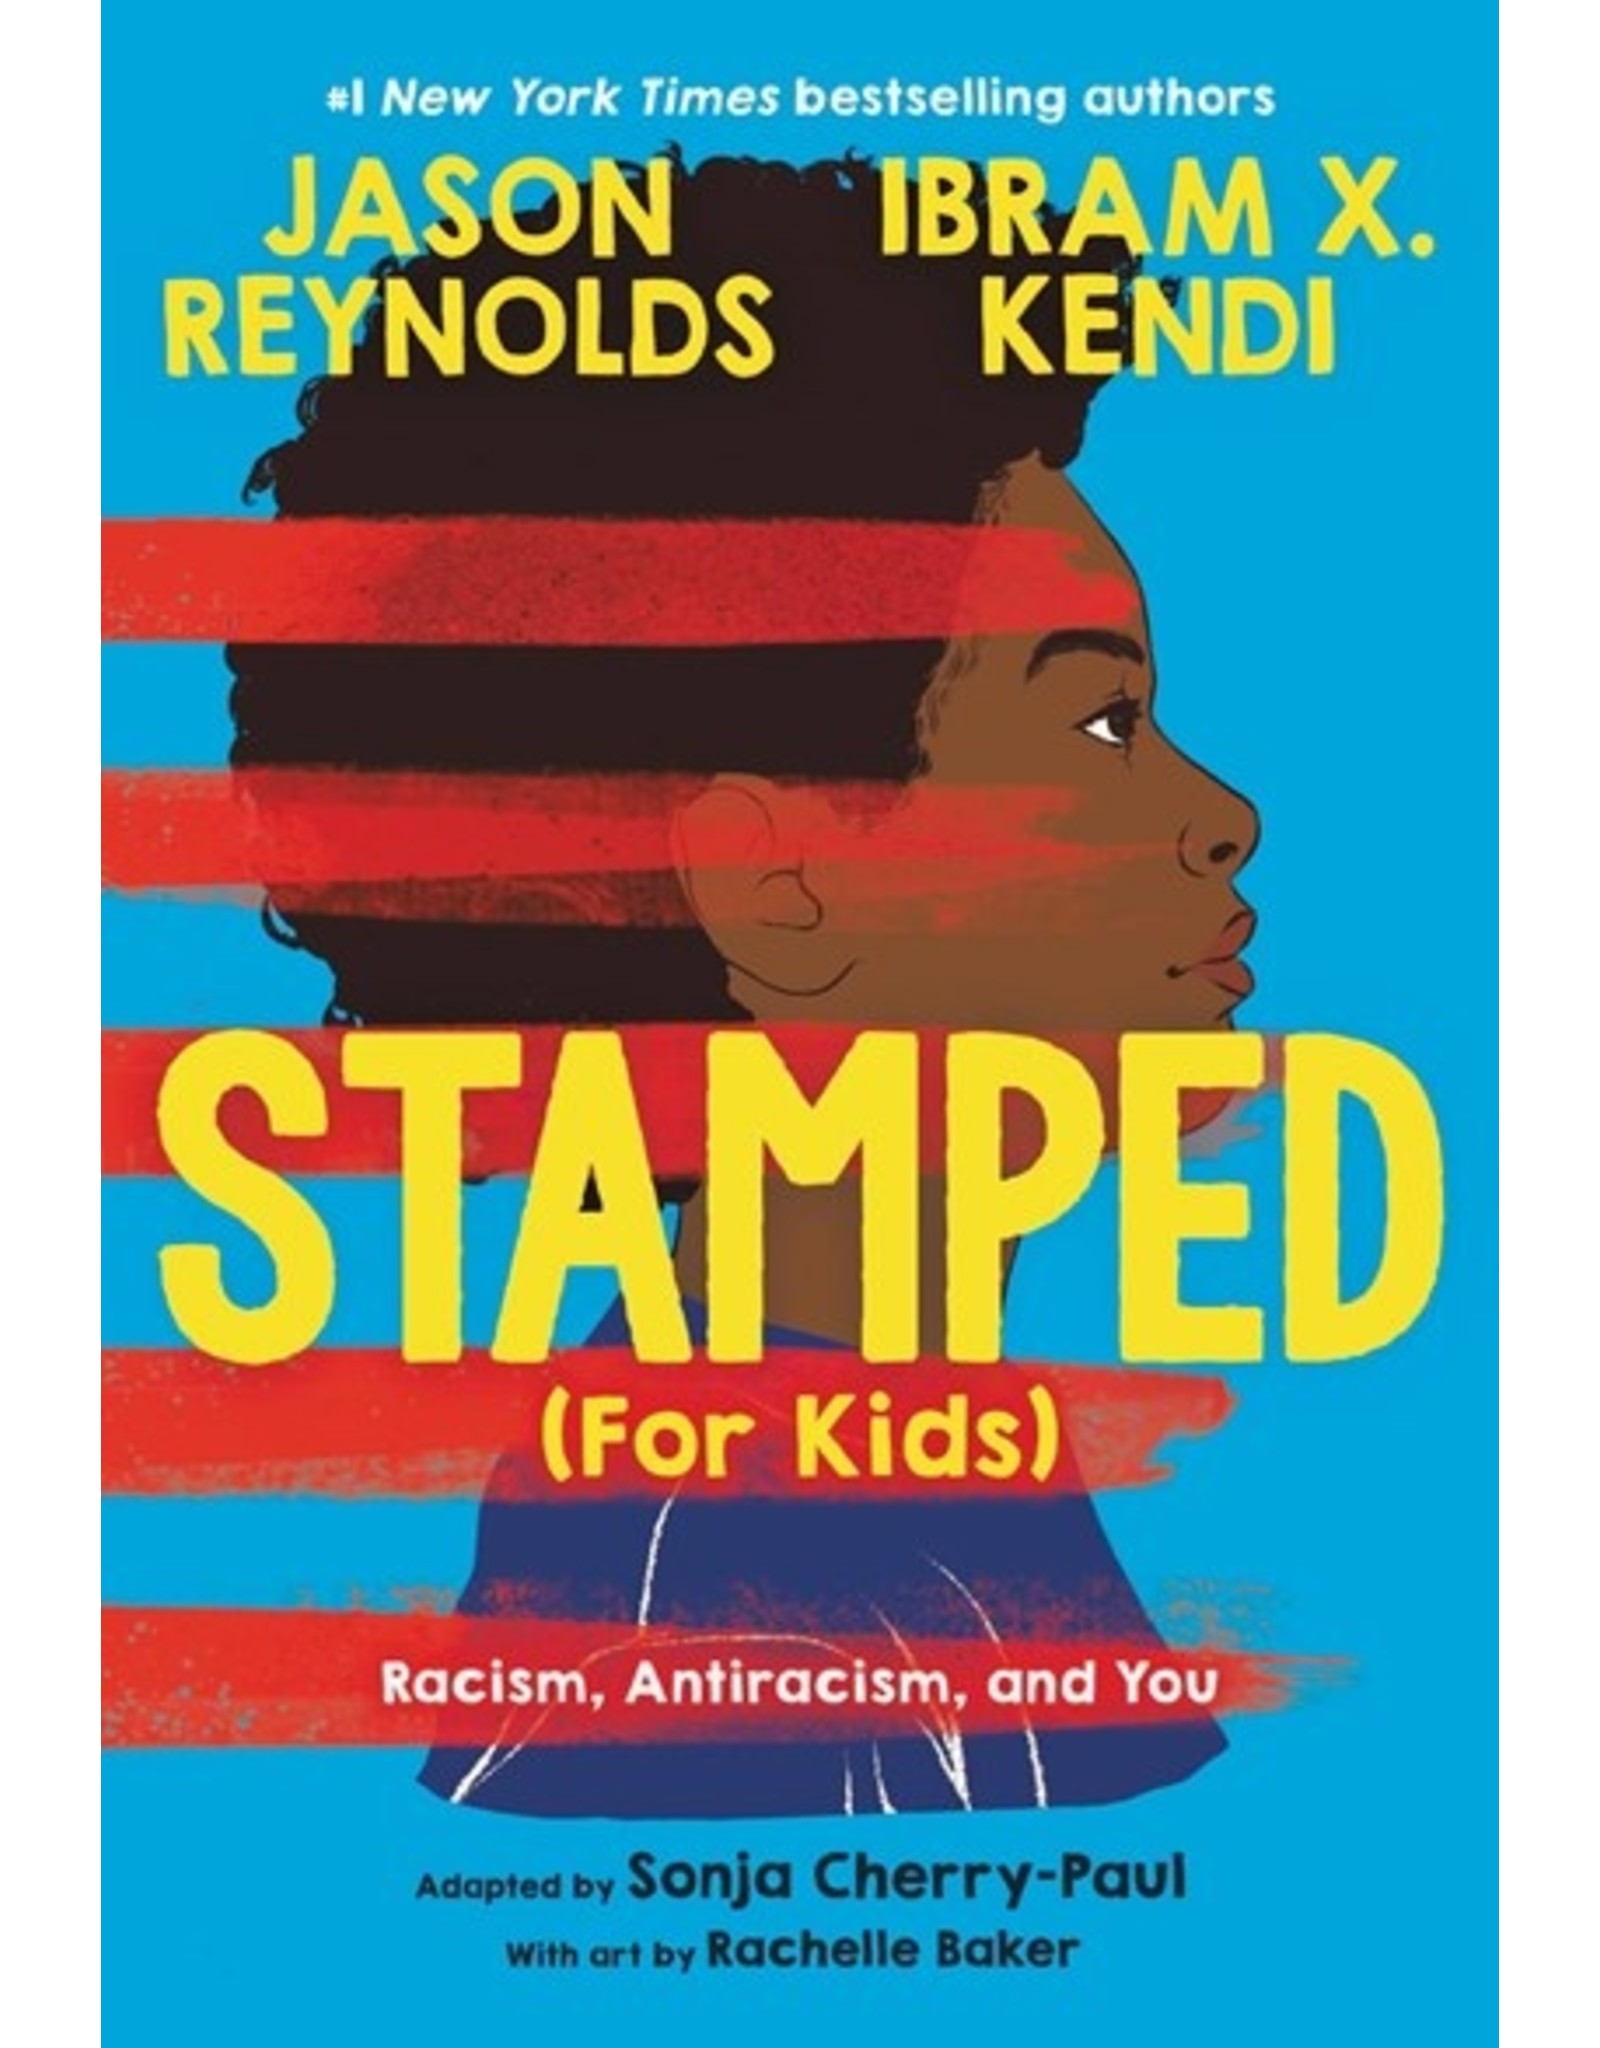 Books Stamped (For Kids) : Racism, Antiracism, and You  Jason Reynolds, Ibram X. Kendi, Sonja Cherry-Paul (overstock)